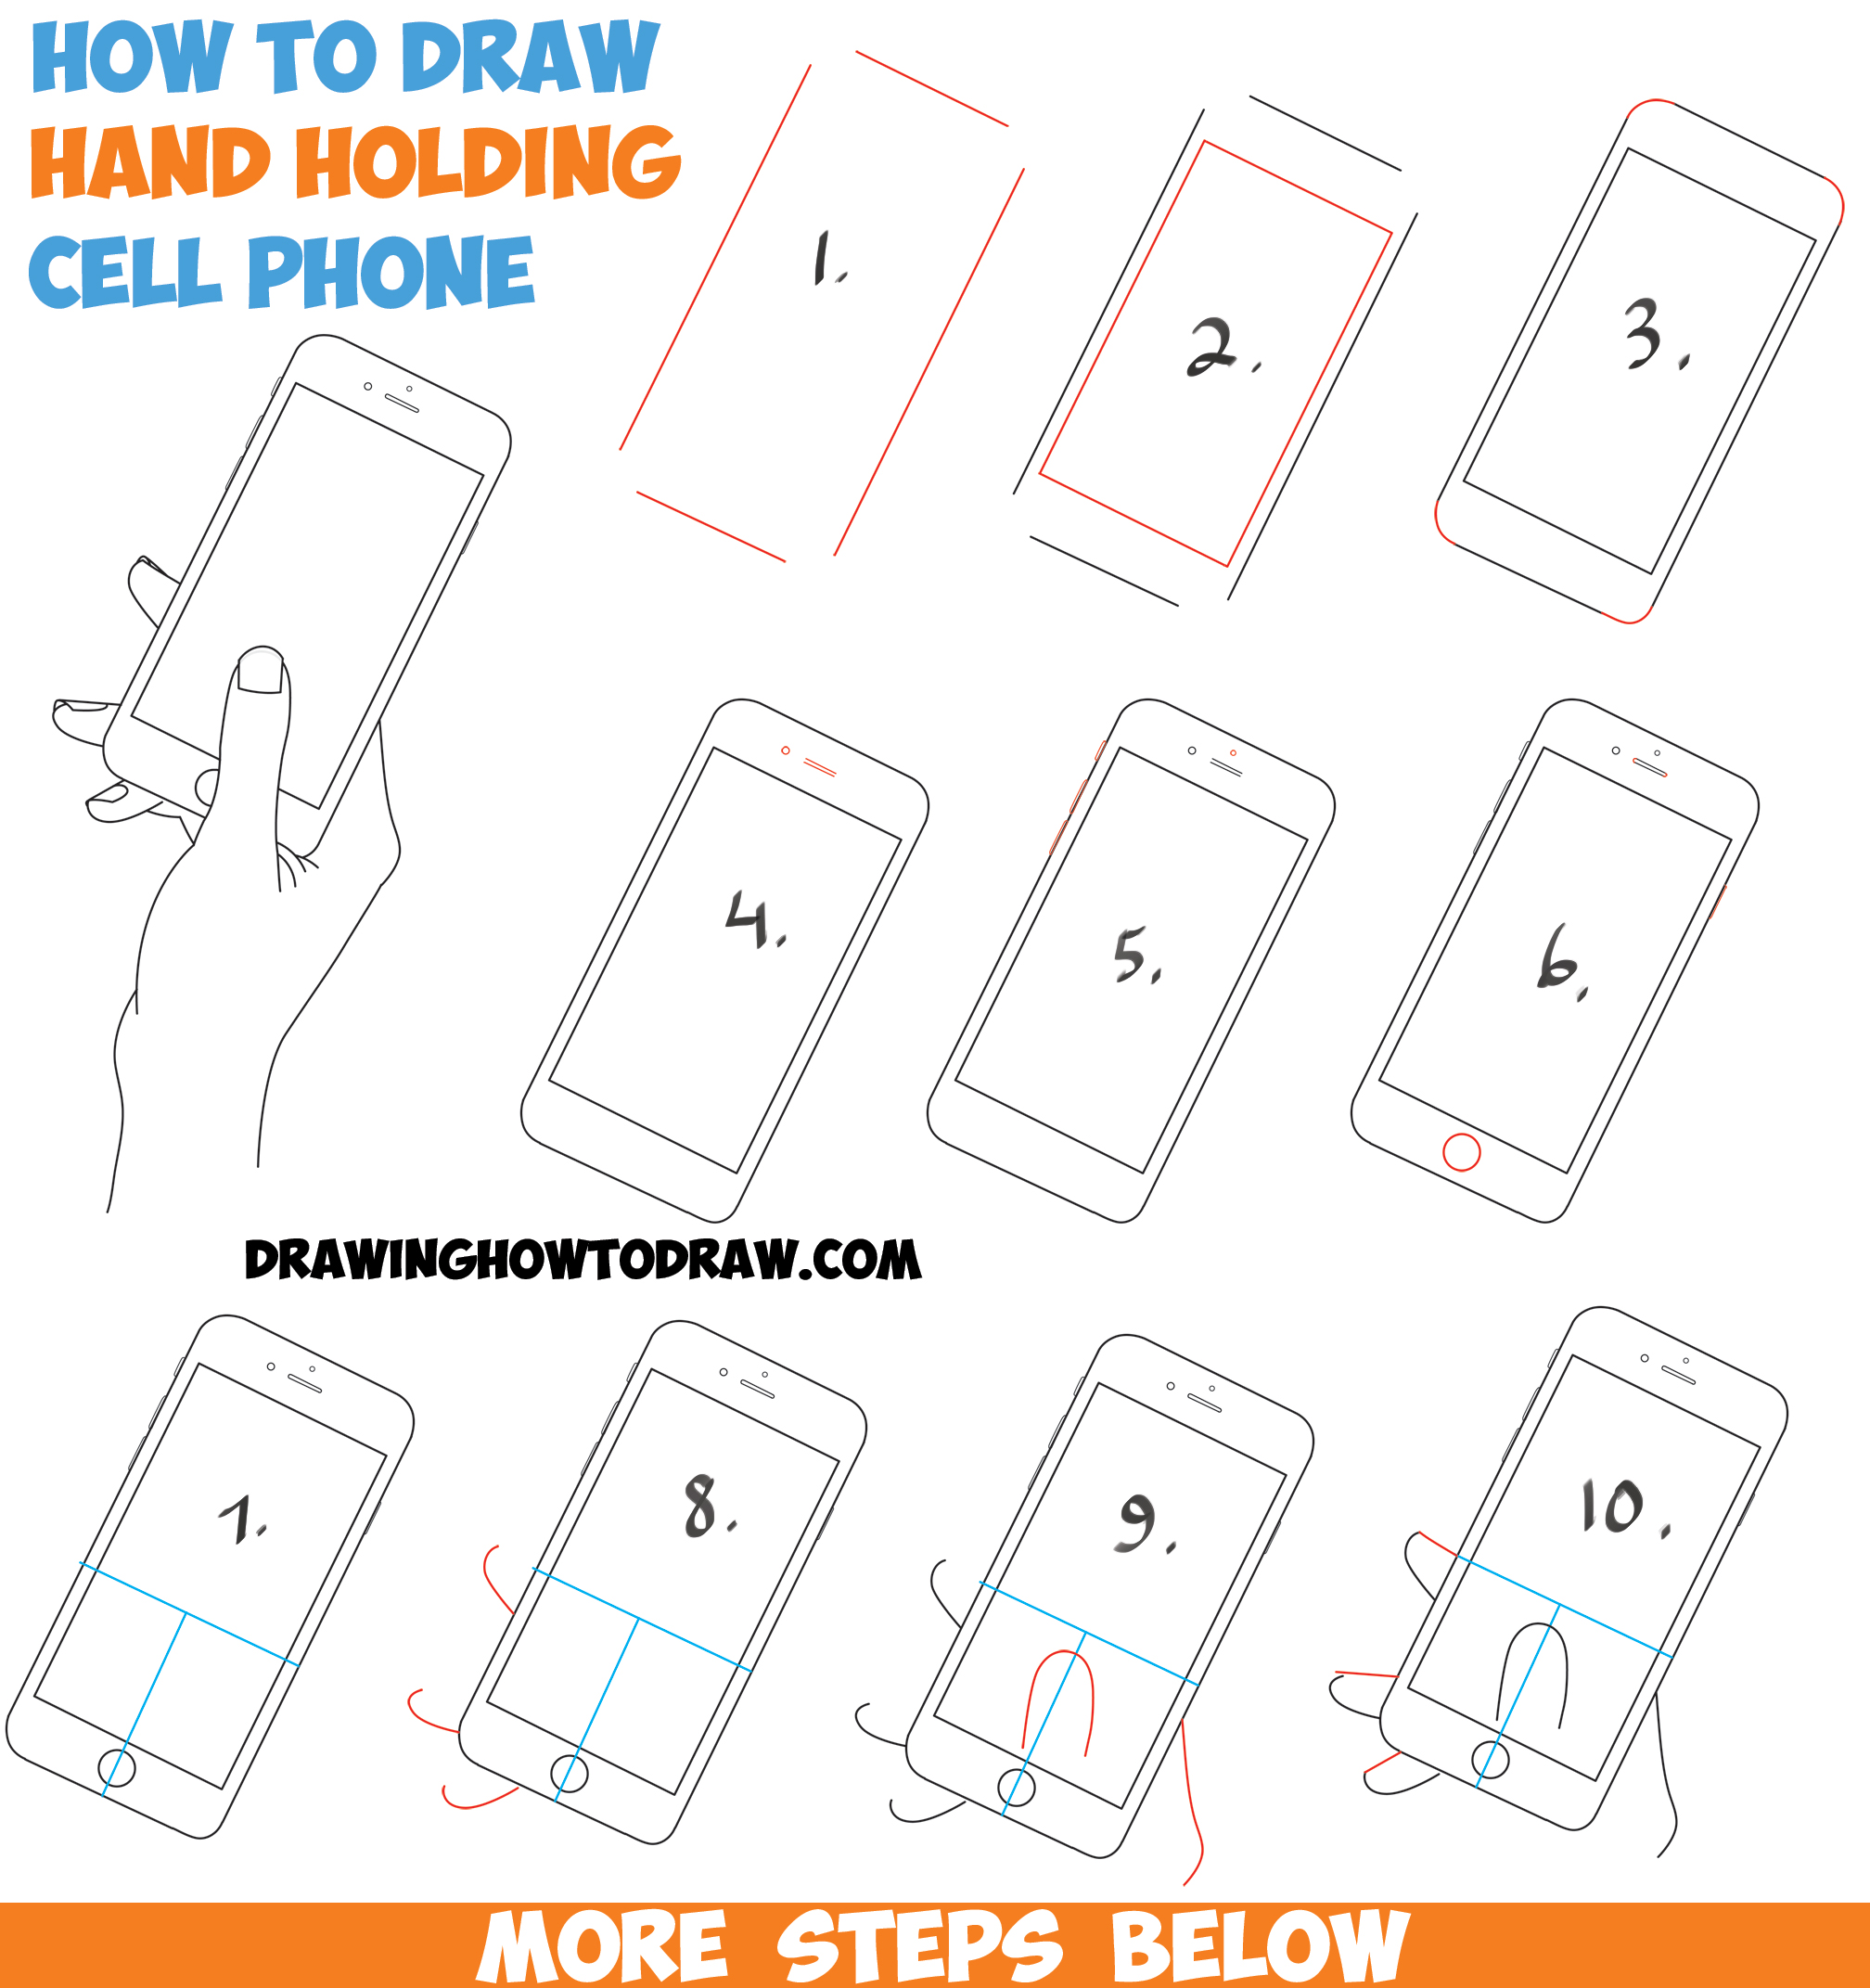 How to Draw a Hand Holding a Cell Phone / iPhone in Easy Step by Step